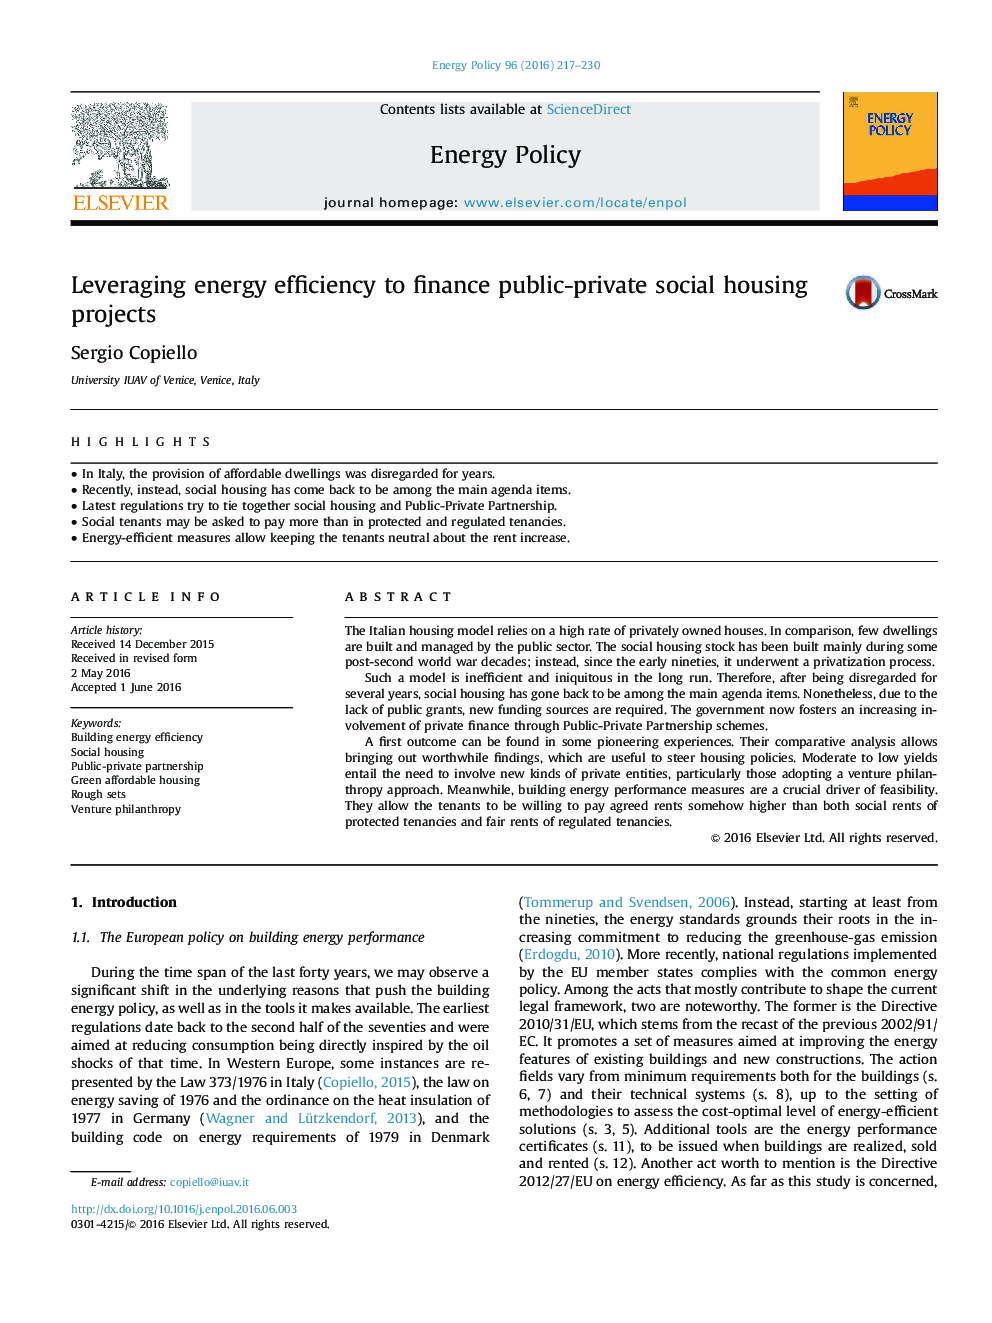 Leveraging energy efficiency to finance public-private social housing projects